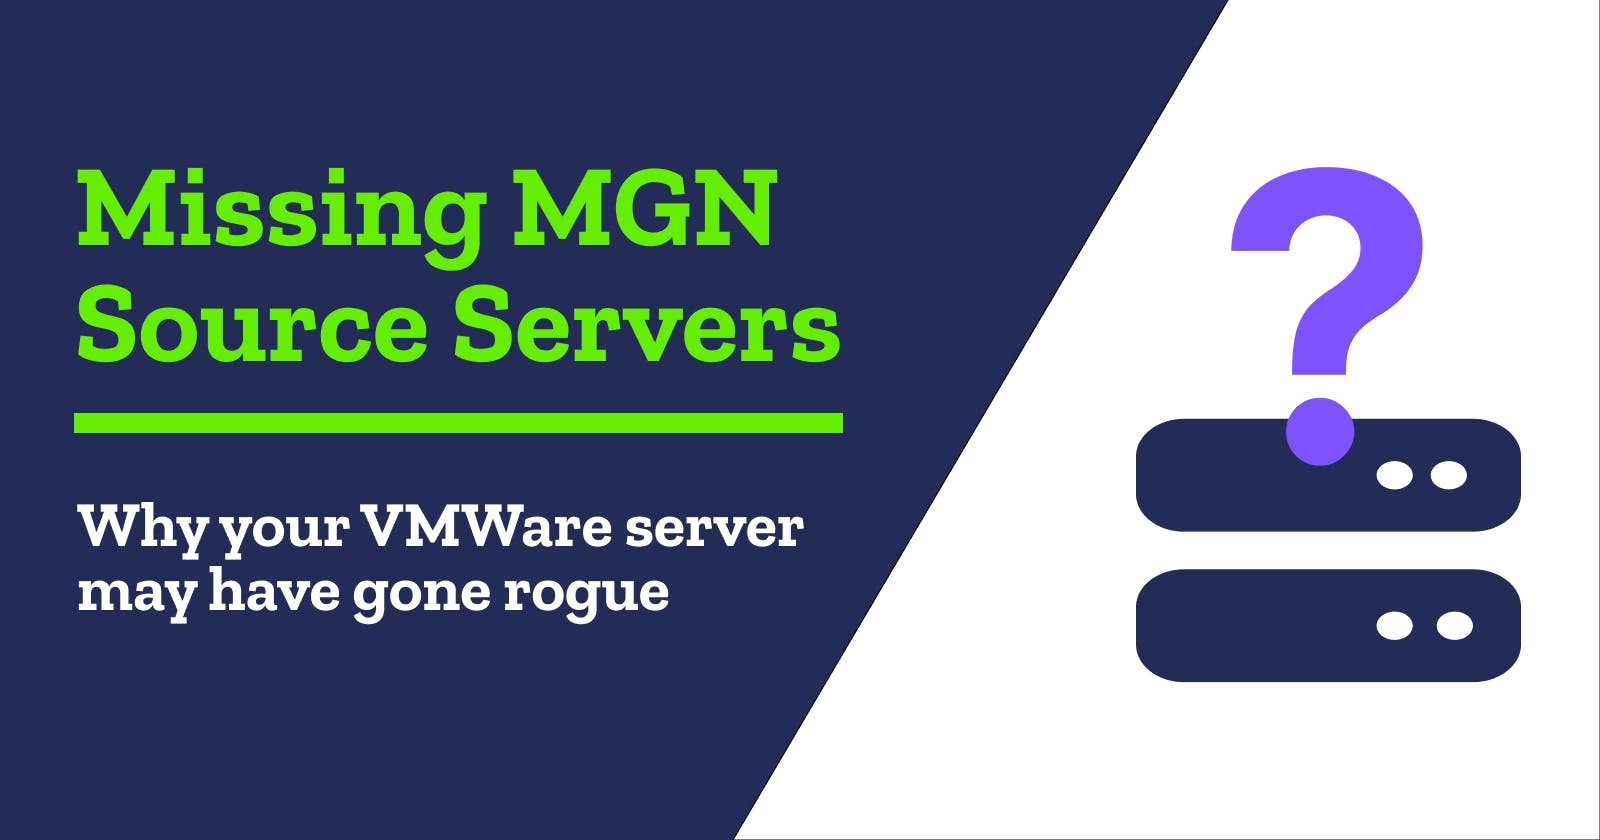 Where did my MGN source server go?